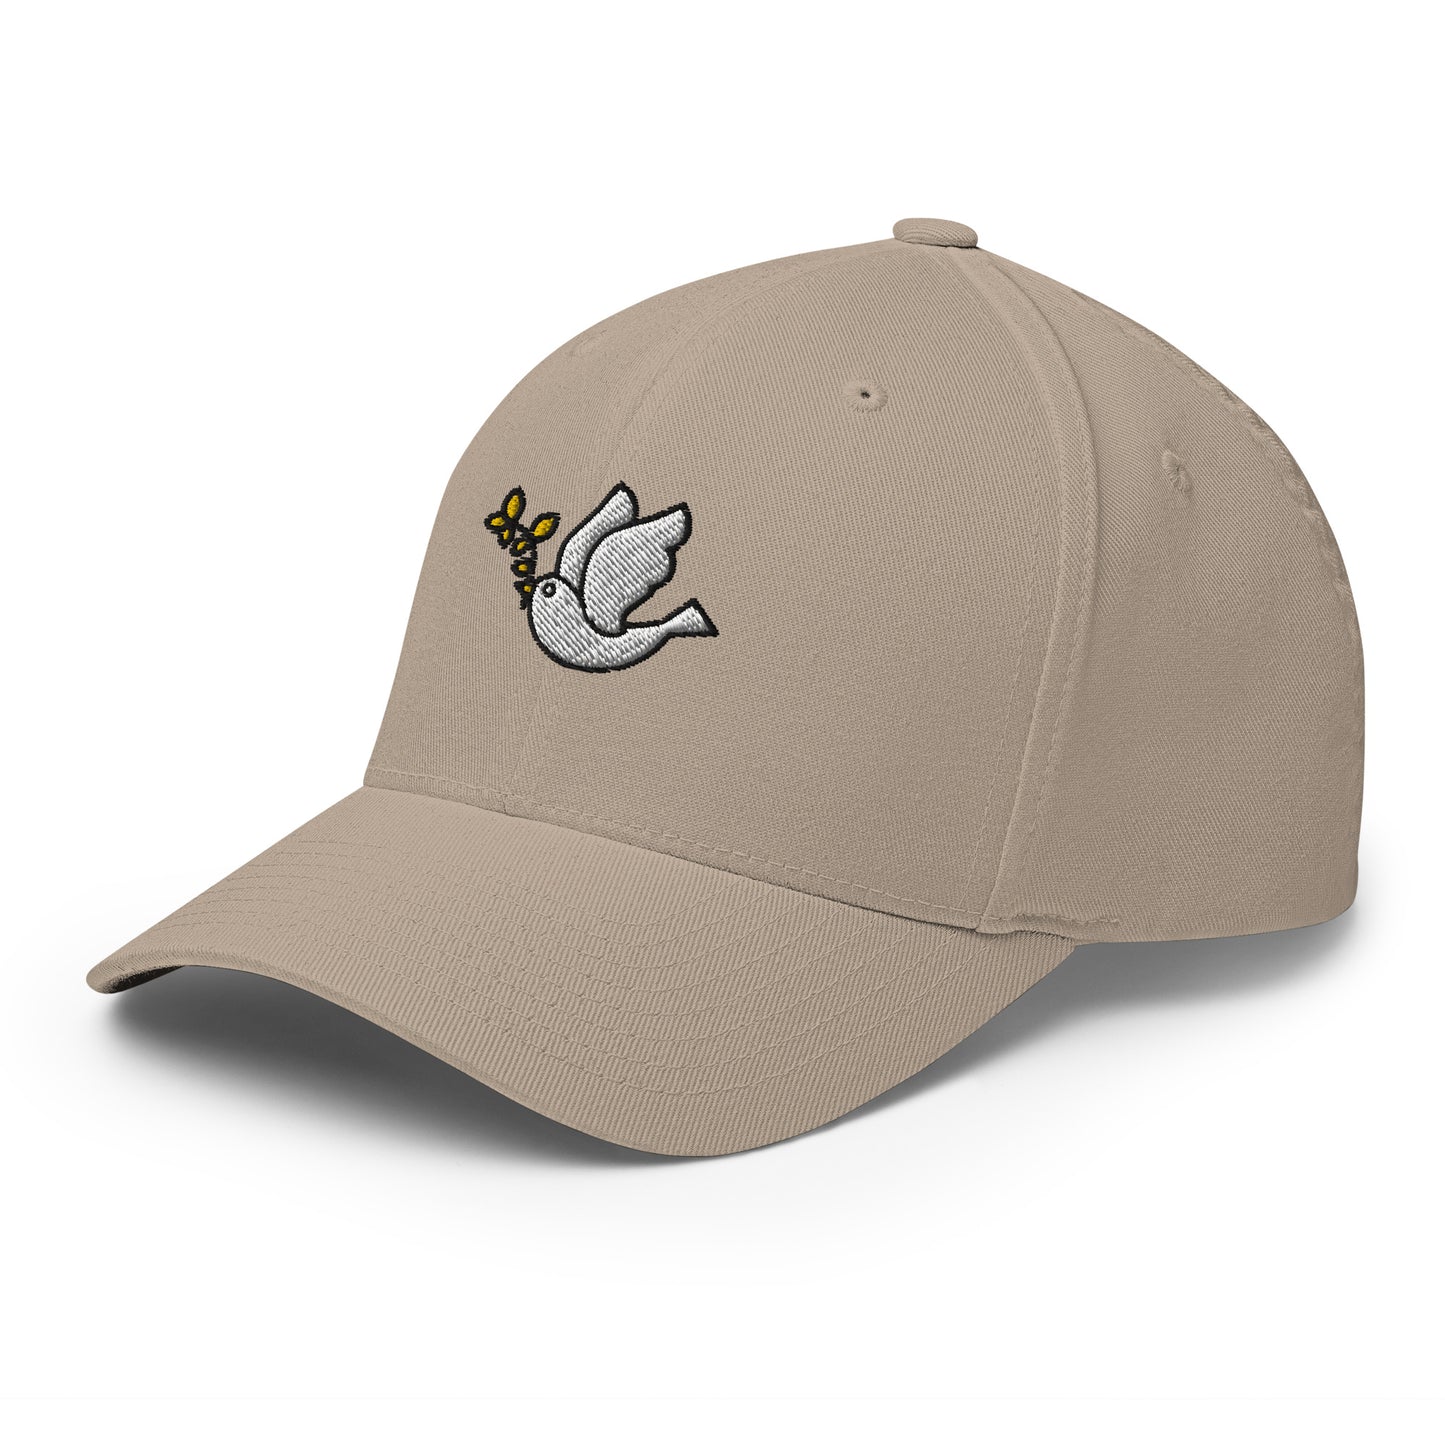  cap-from-the-front-with-holy spirit-symbol